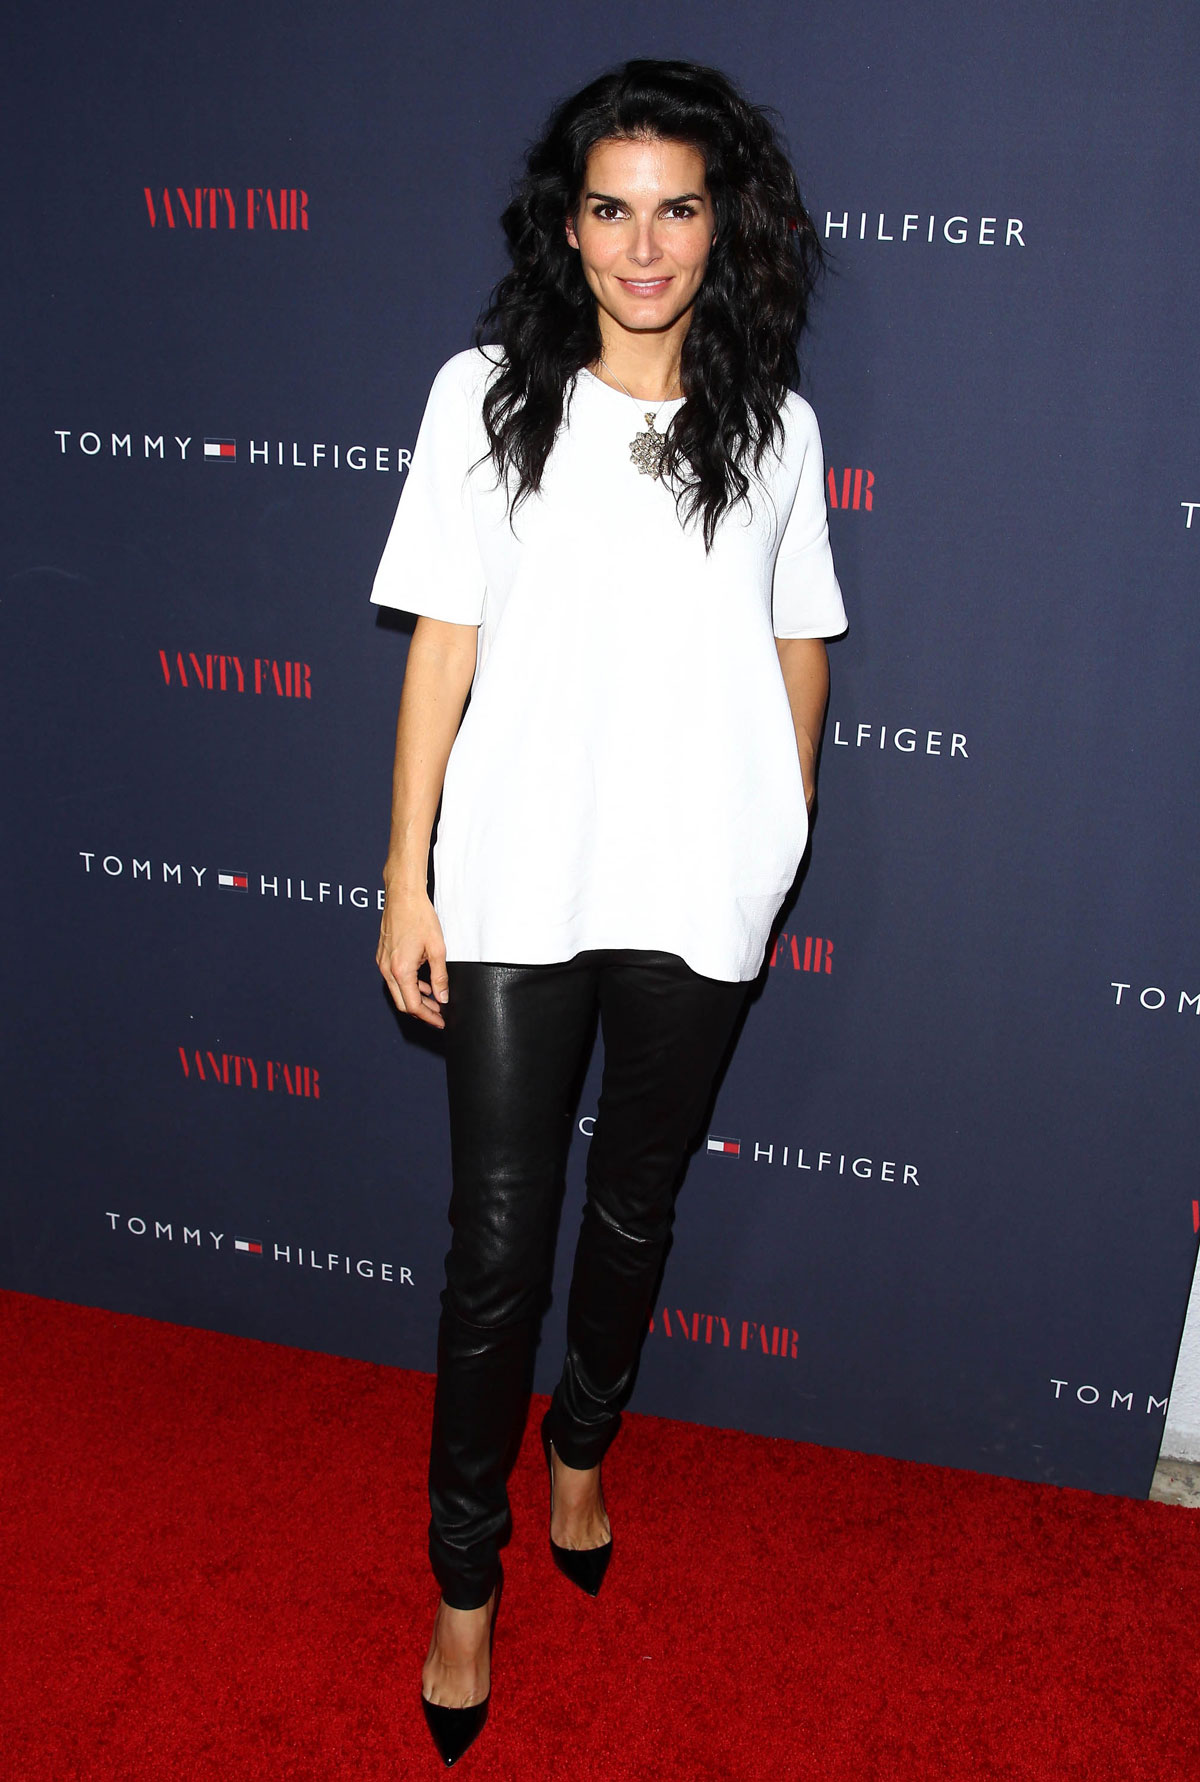 Angie Harmon attends Zooey Deschanel And Tommy Hilfiger Debut New Capsule Collection